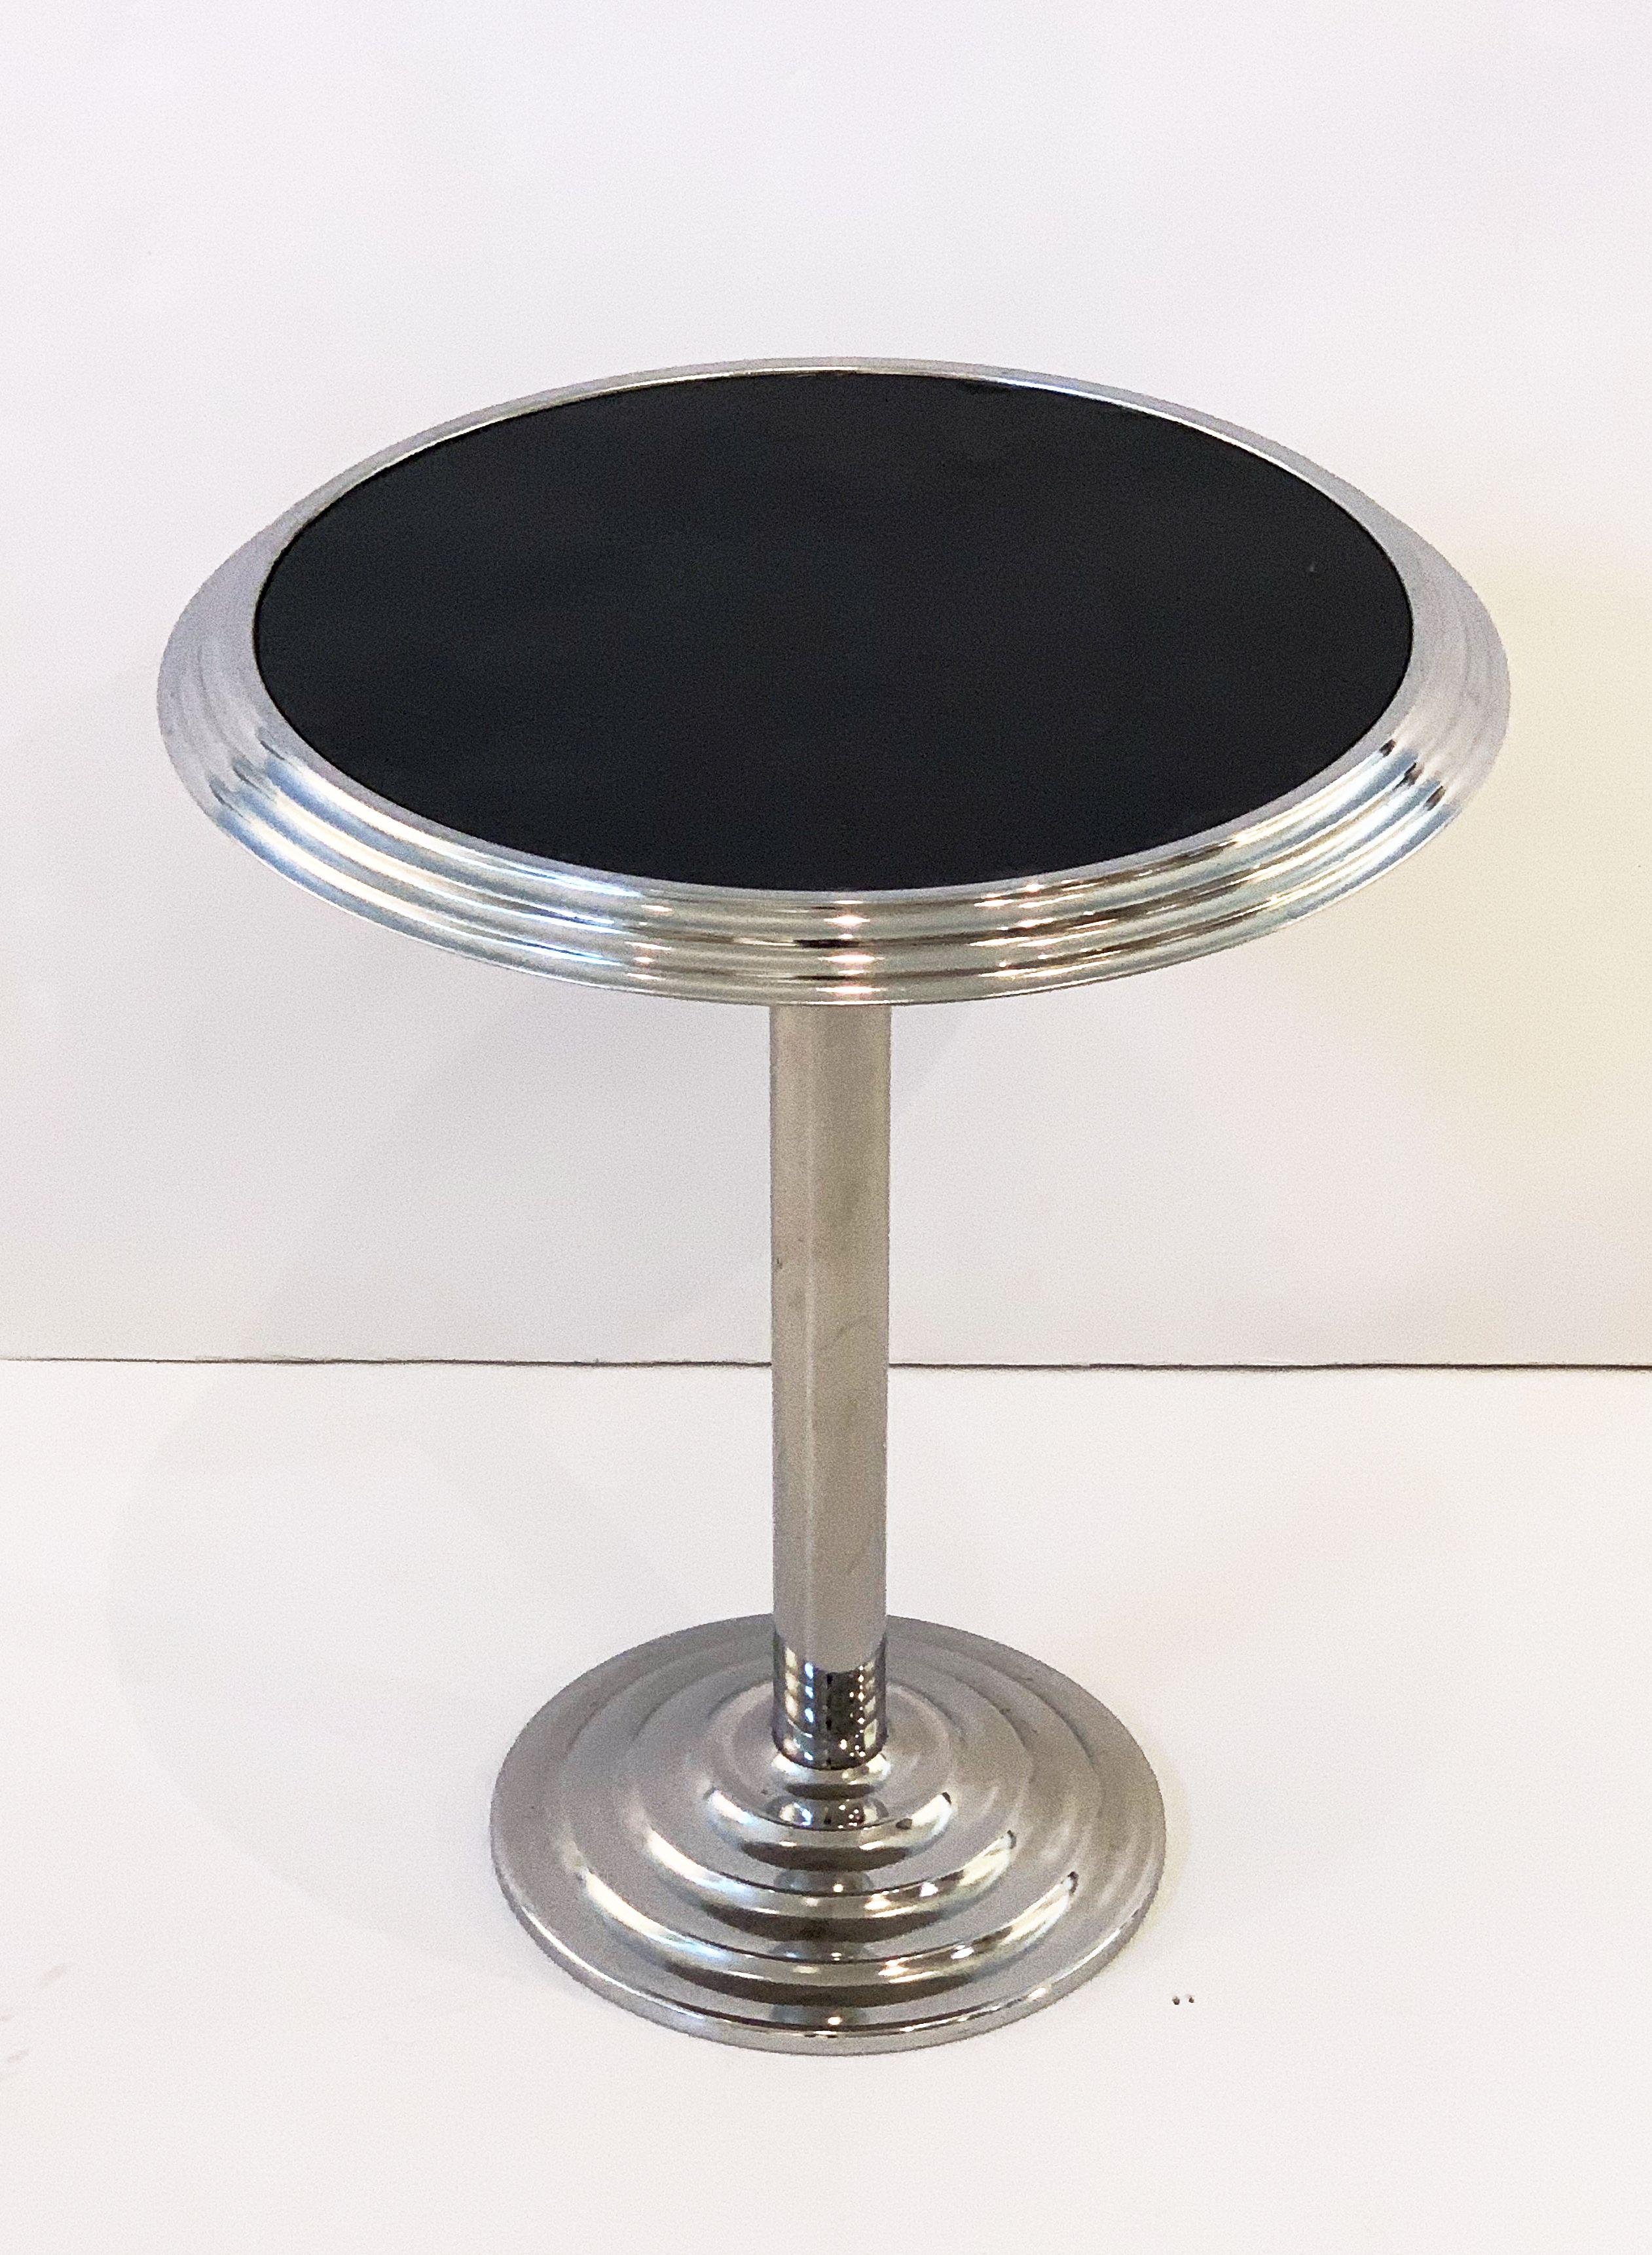 A fine French round bistro table of chromed steel from the Art Deco period, featuring a circular graduated top with black enamel center, mounted to a column pedestal with graduated concentric base.